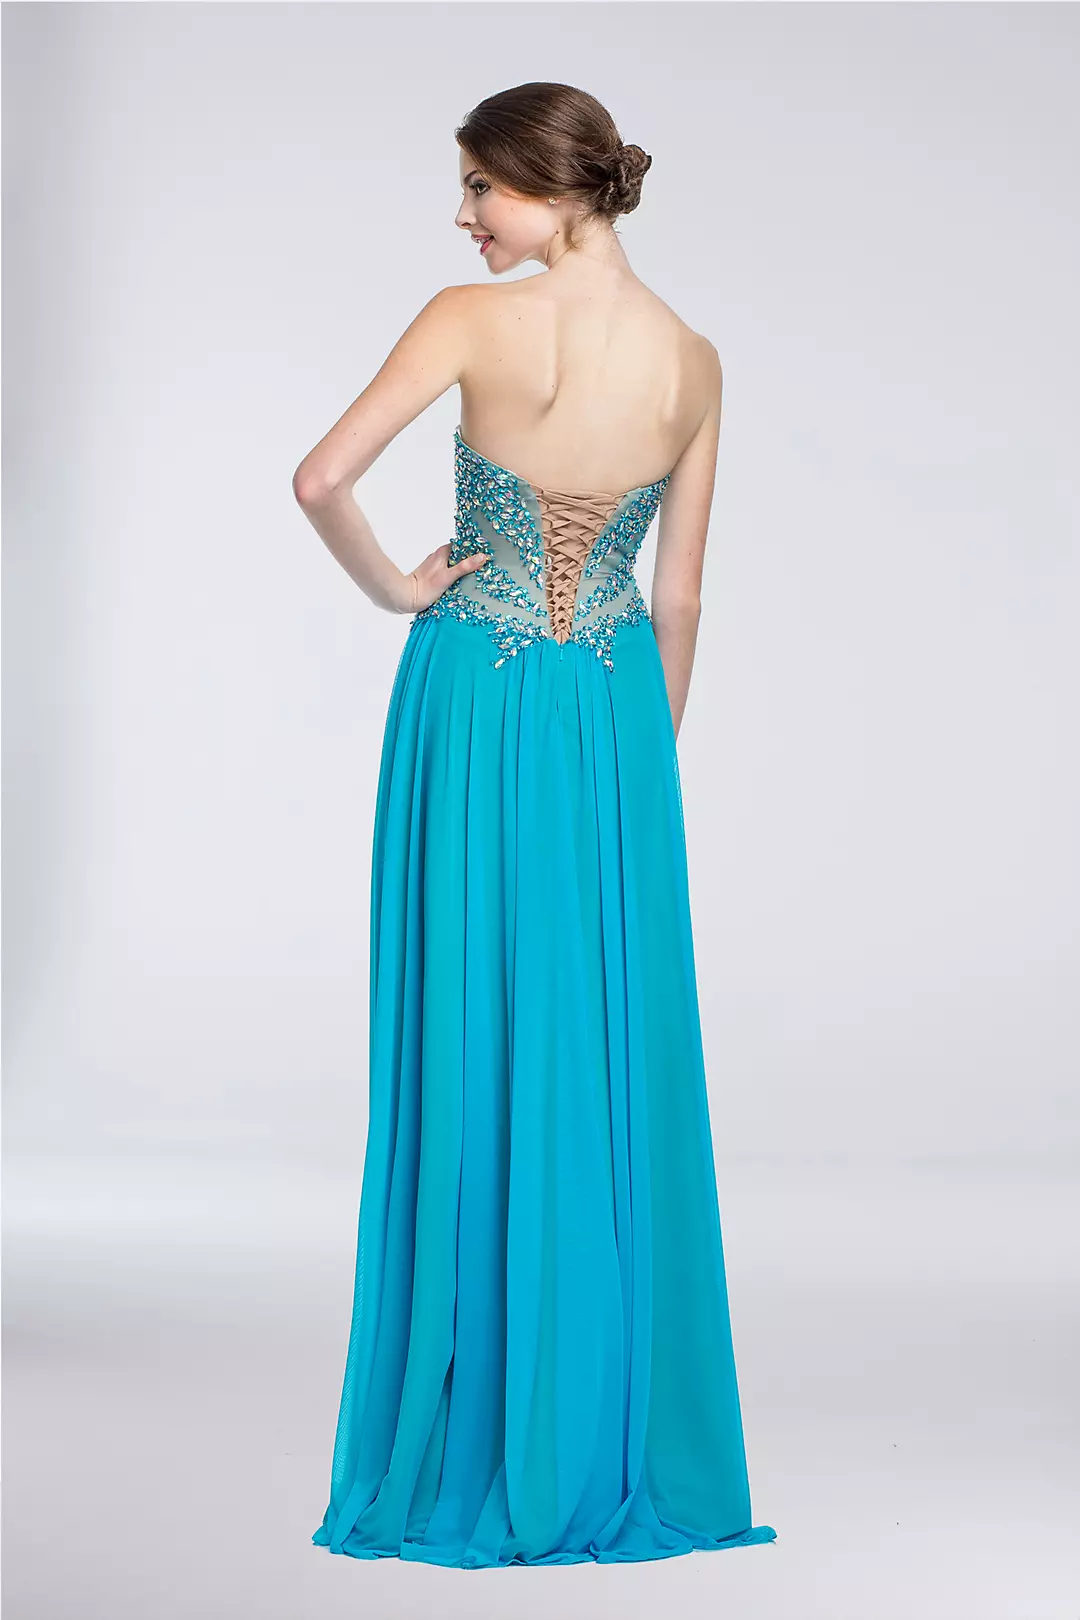 Strapless A-Line Dress with Beaded Illusion Mesh  Image 2